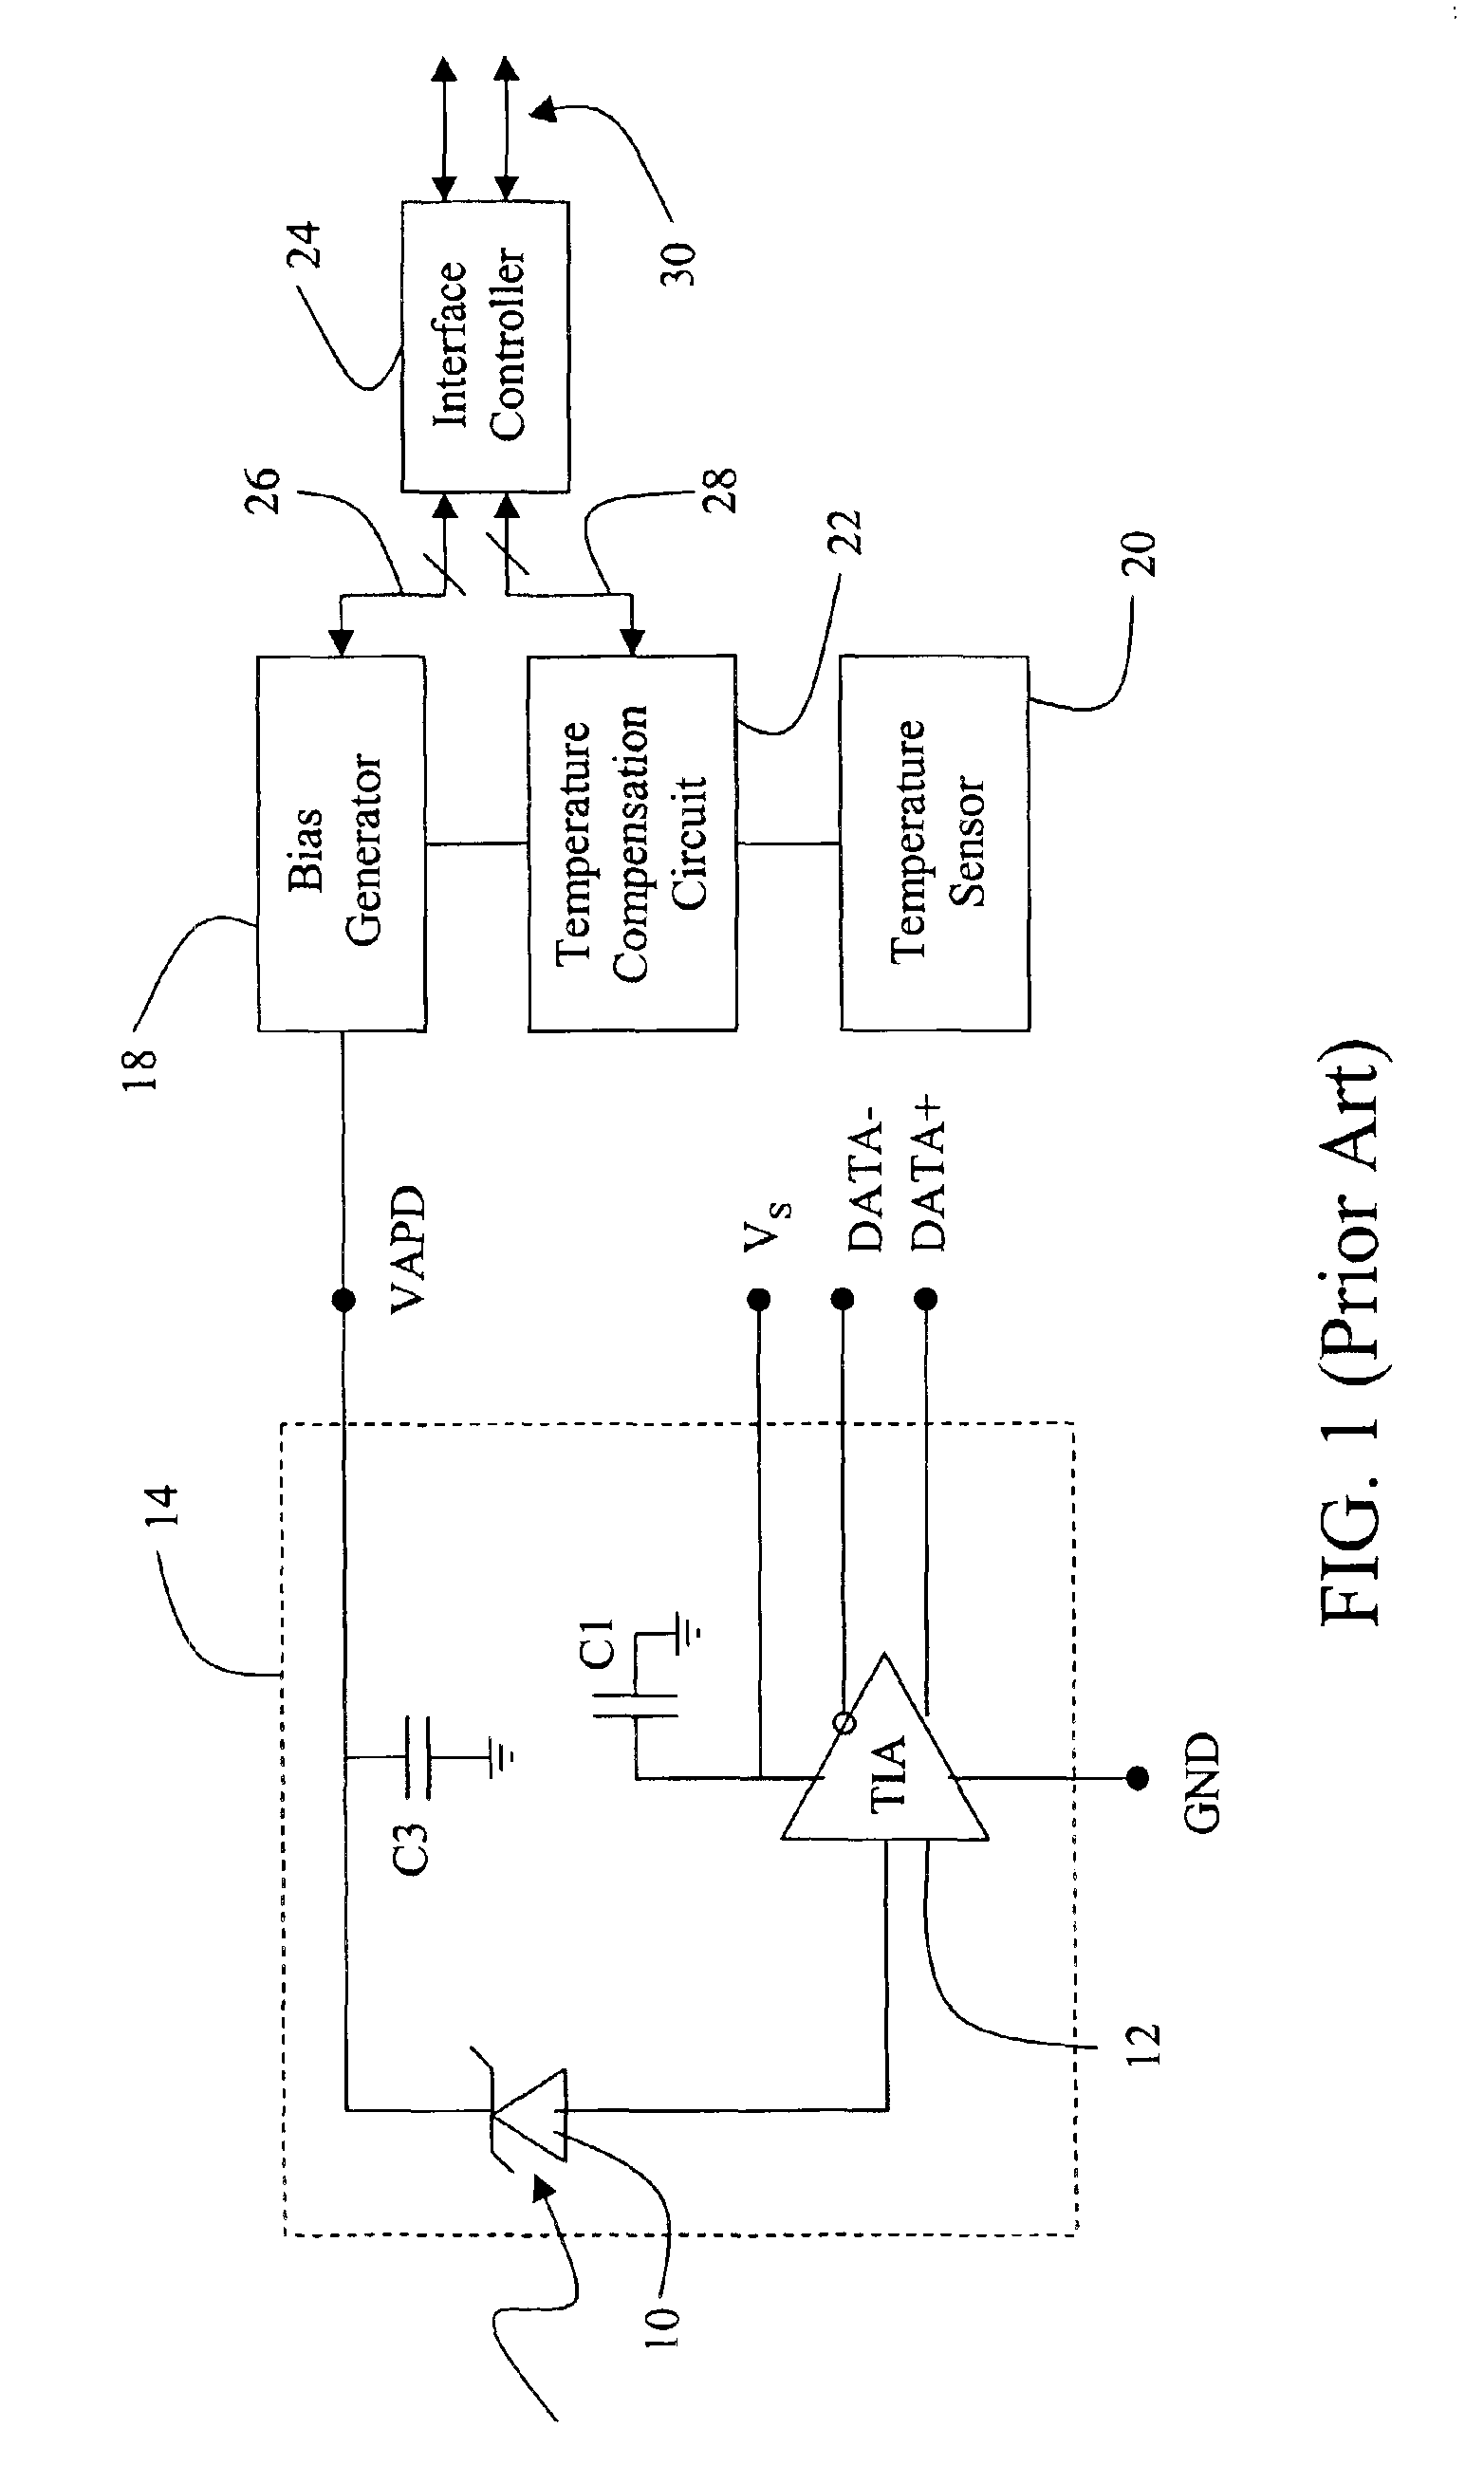 Single chip ASIC and compact packaging solution for an avalanche photodiode (APD) and bias circuit